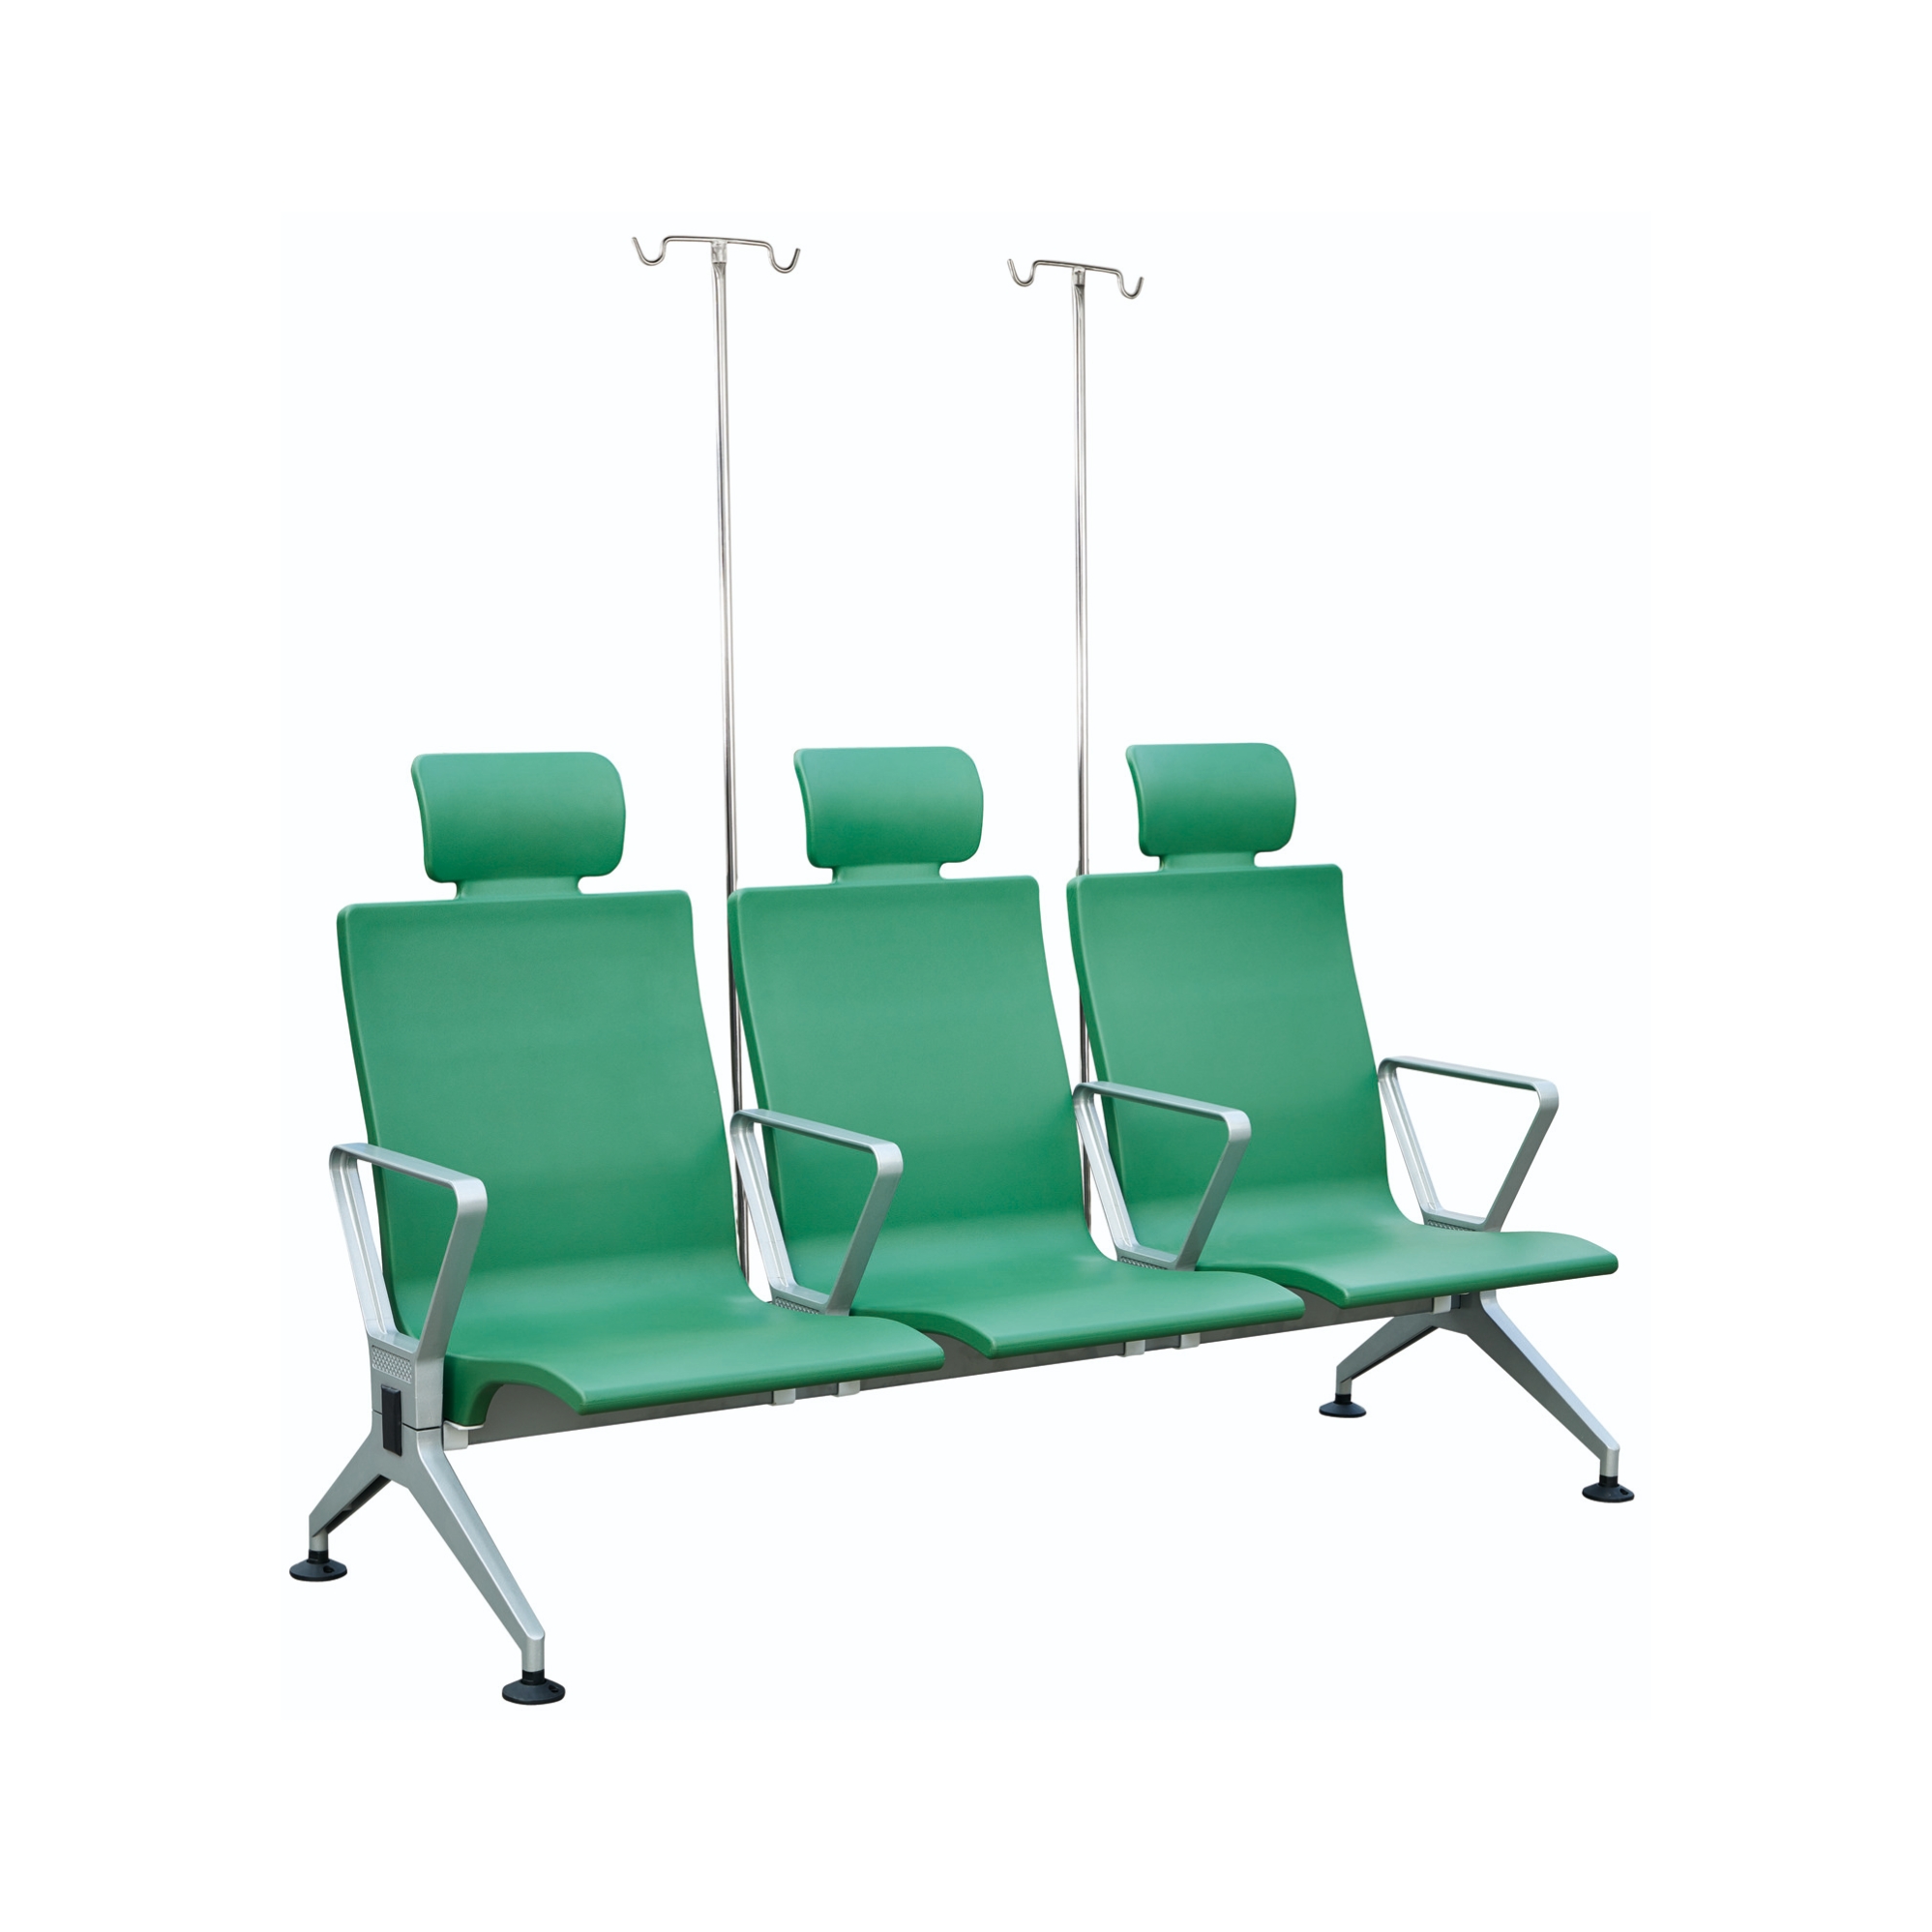 3 seat metal chair PU leather cushion waiting room chairs gang link lounge waiting chair for hospital airport office